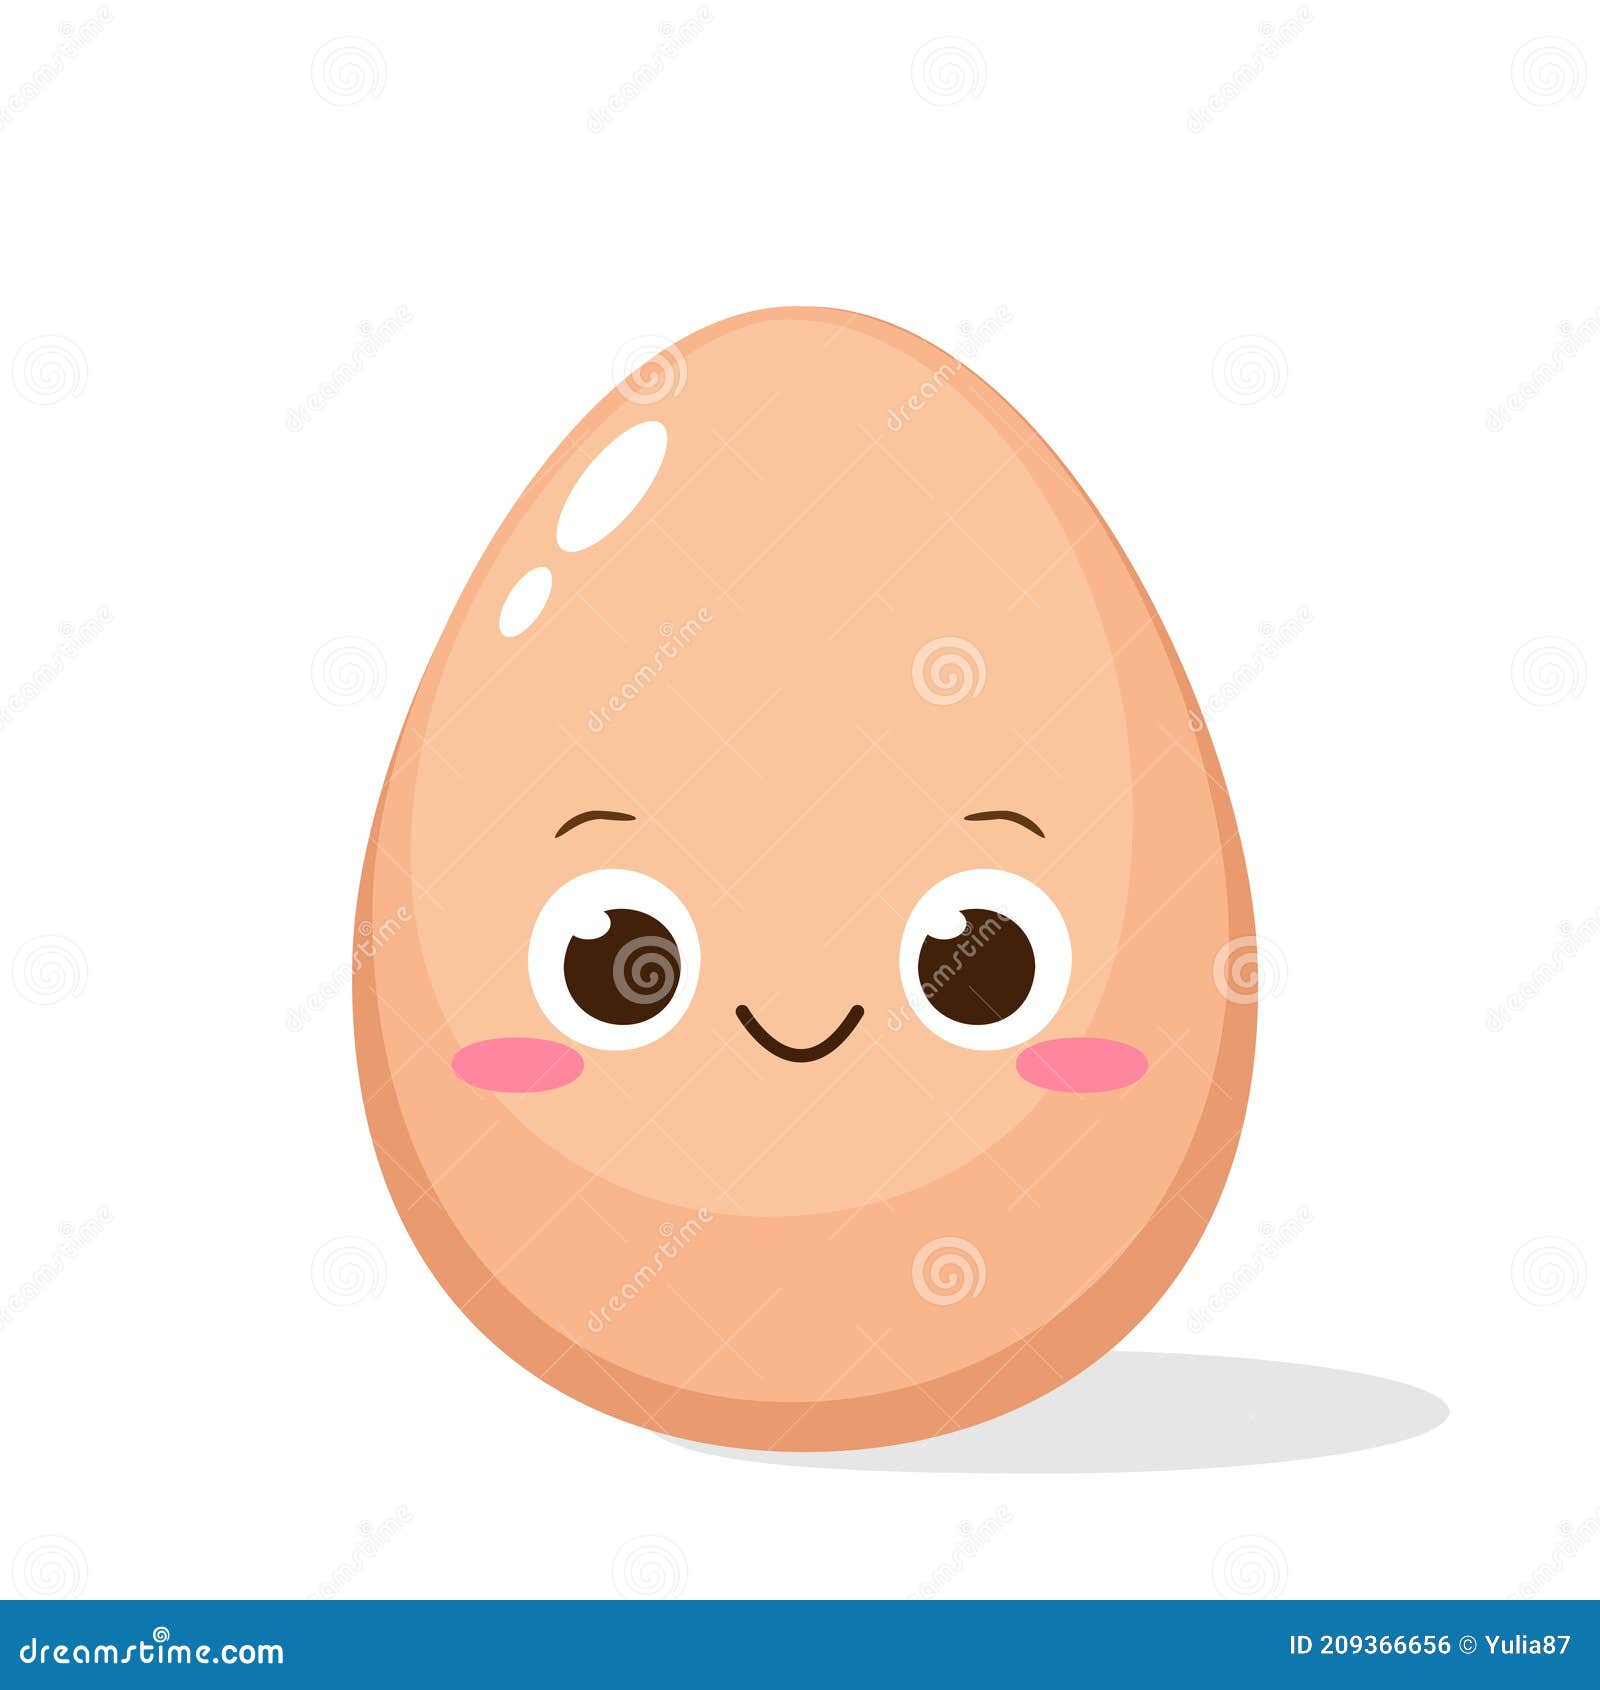 Cute Cartoon Happy Egg Charactercter Stock Vector - Illustration of cheerful,  graphic: 209366656